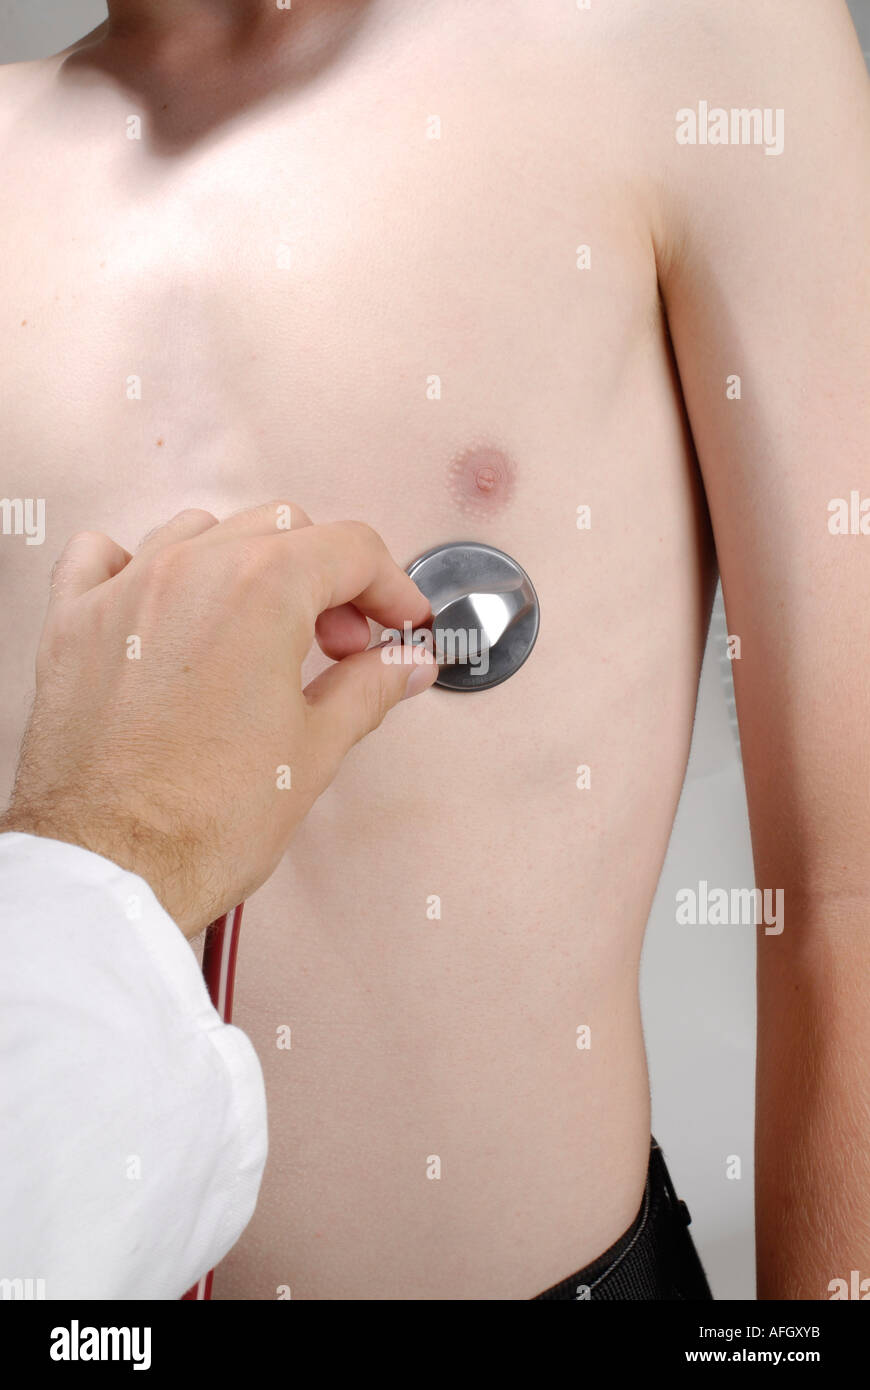 MR doctor examines patient with a stethoskop Stock Photo